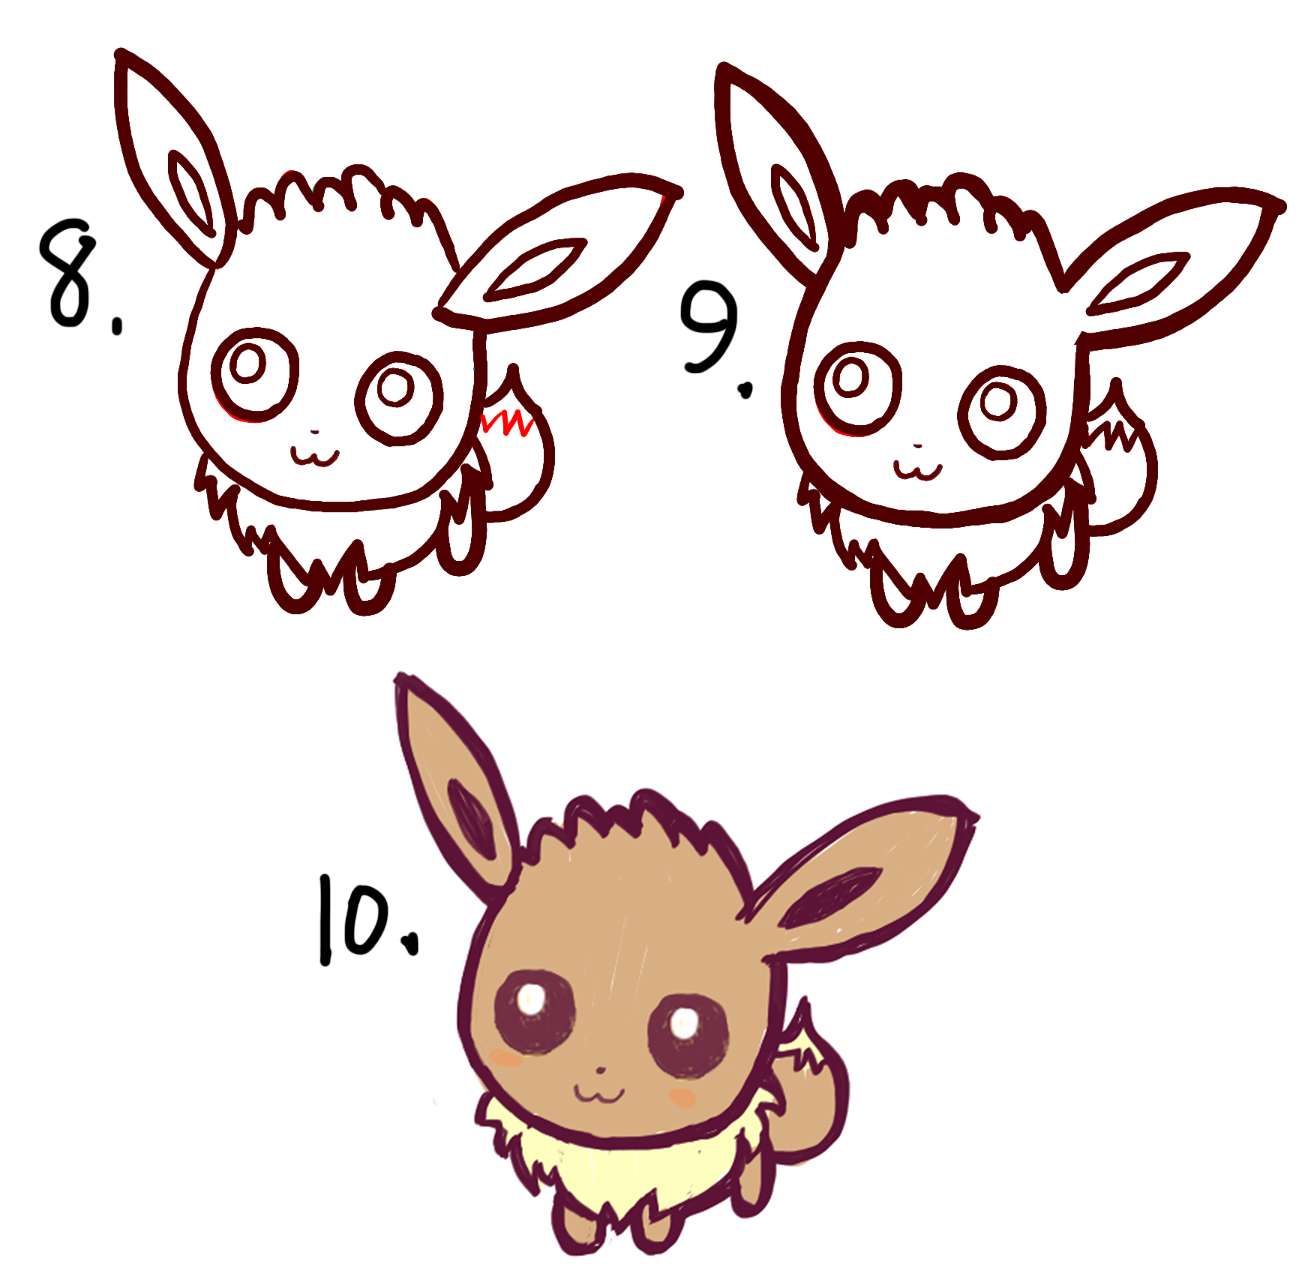 How to Draw Cute Baby Chibi Eevee from Pokemon Easy Step by Step ...